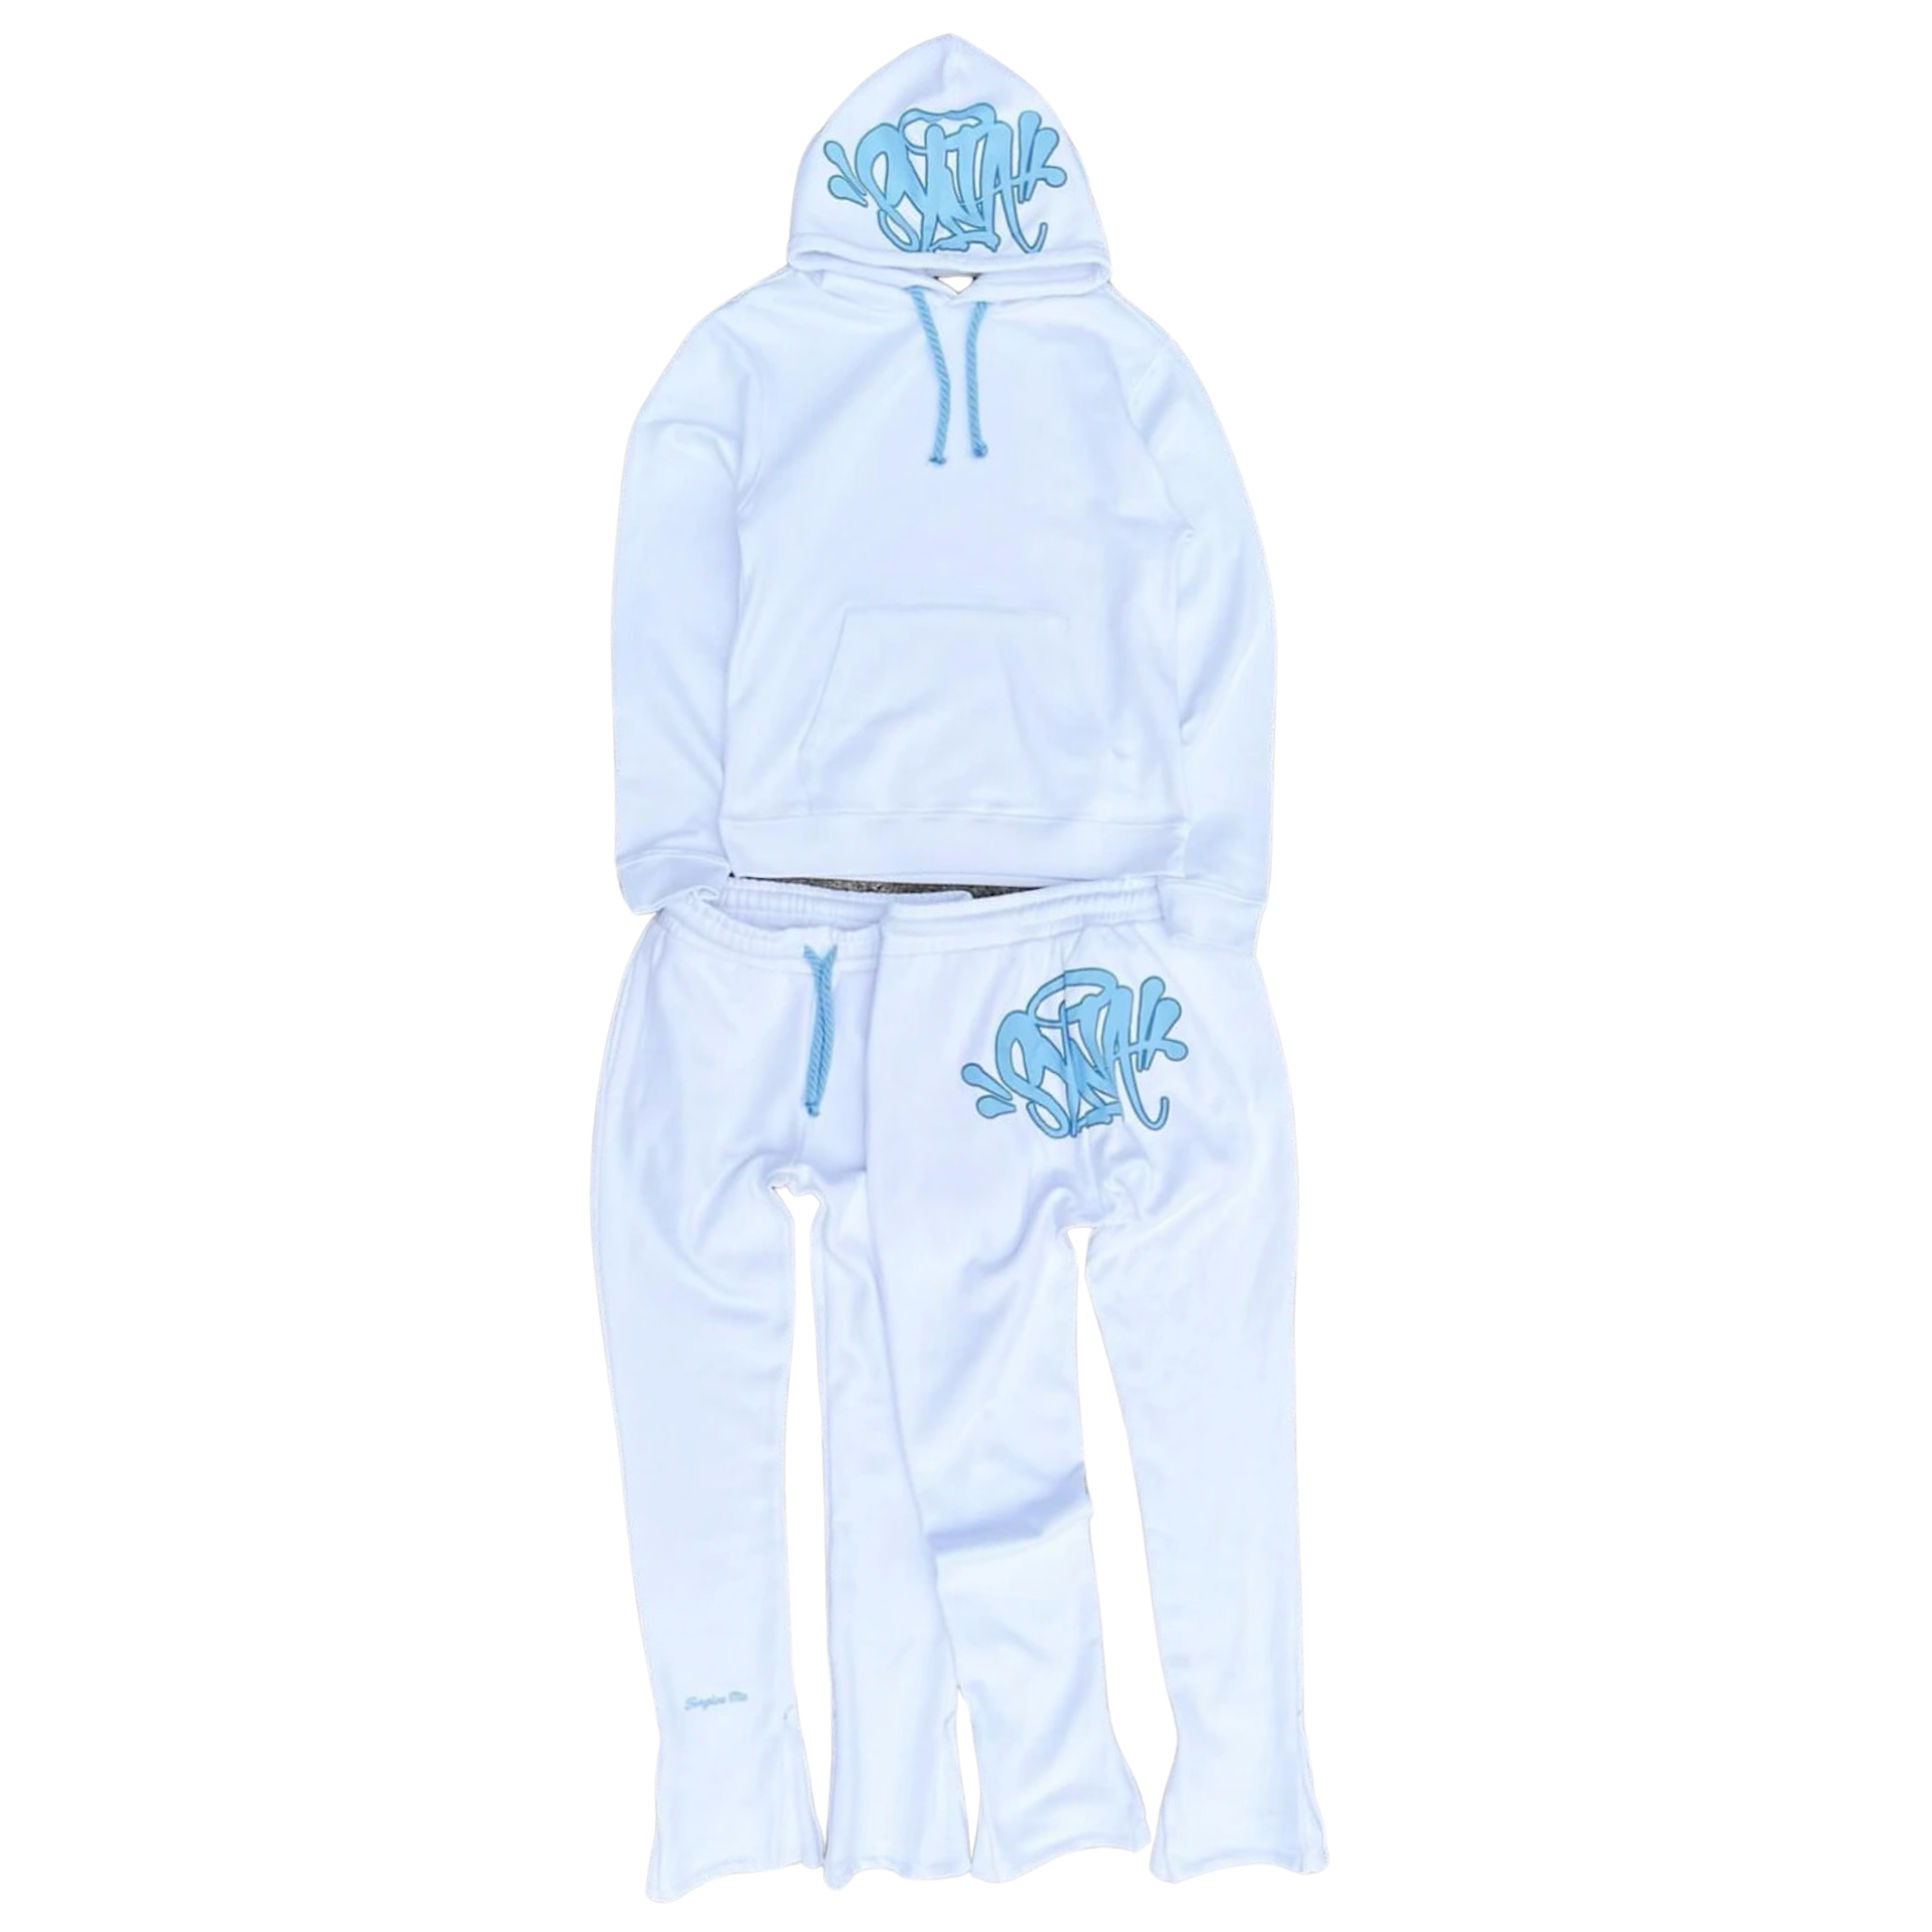 Syna Light Blue Tracksuit (Australian Exclusive)